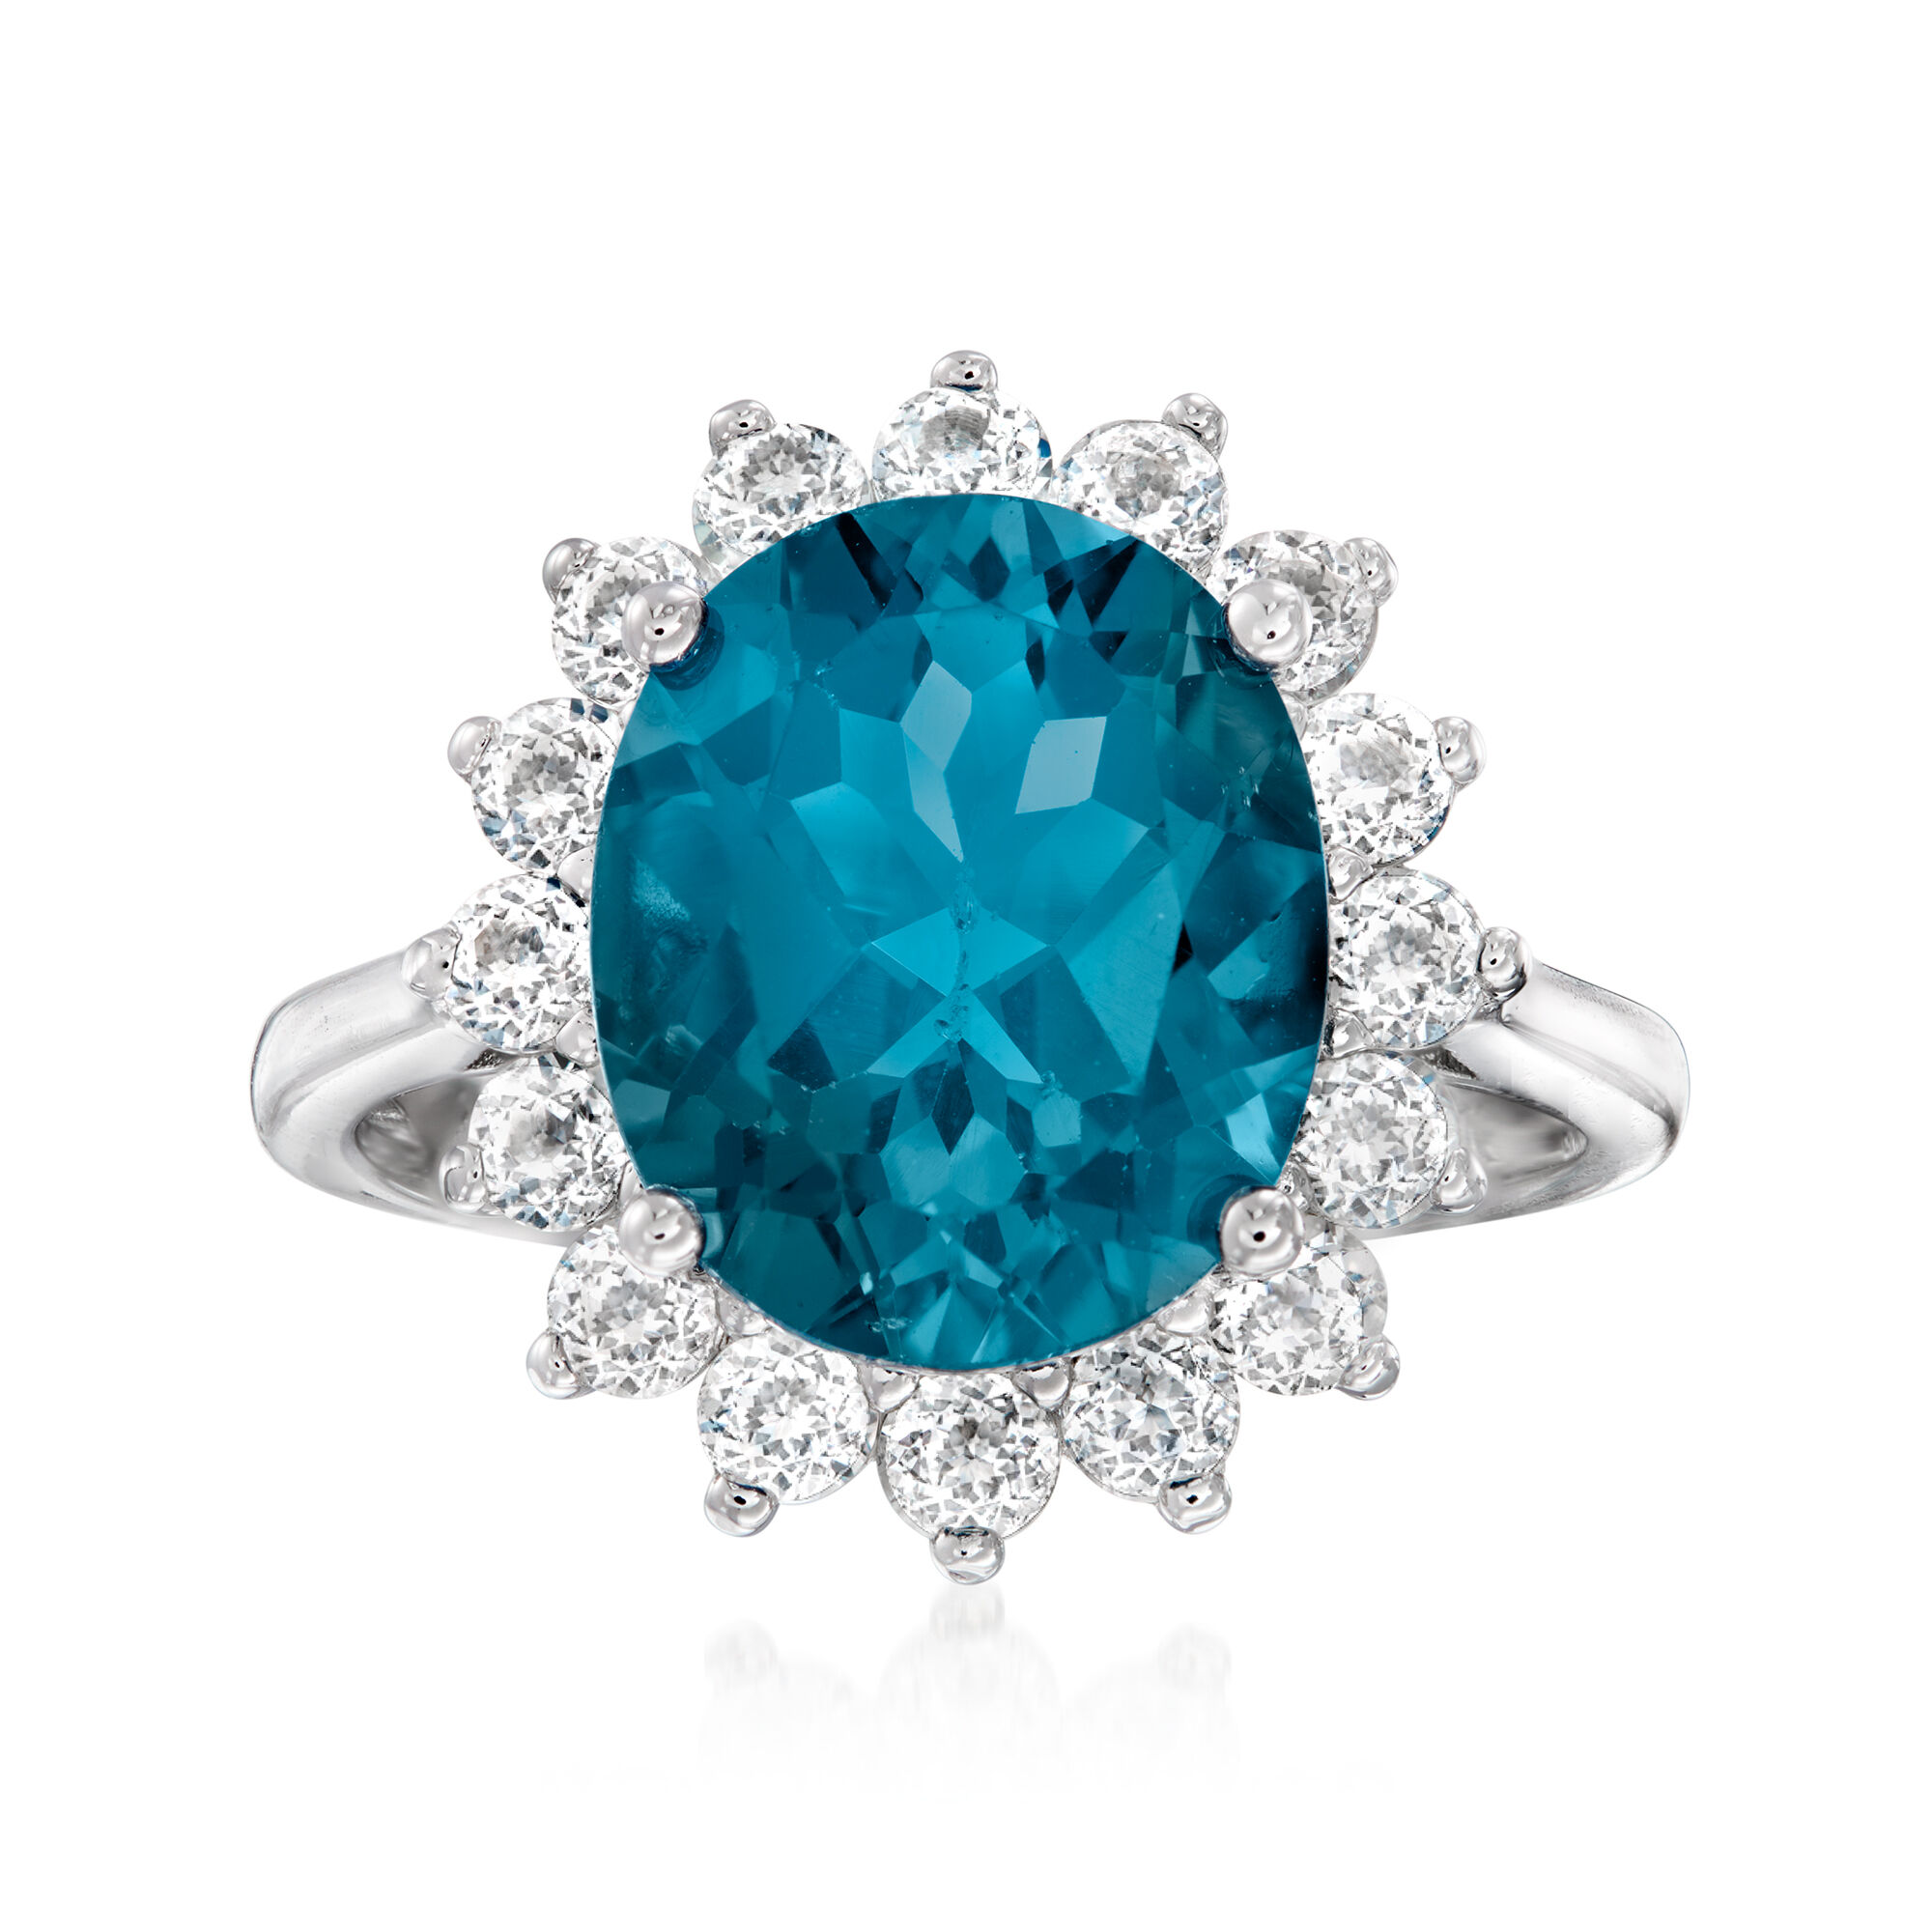 5.40 Carat London Blue Topaz and 1.10 ct. t.w. White Topaz Ring in